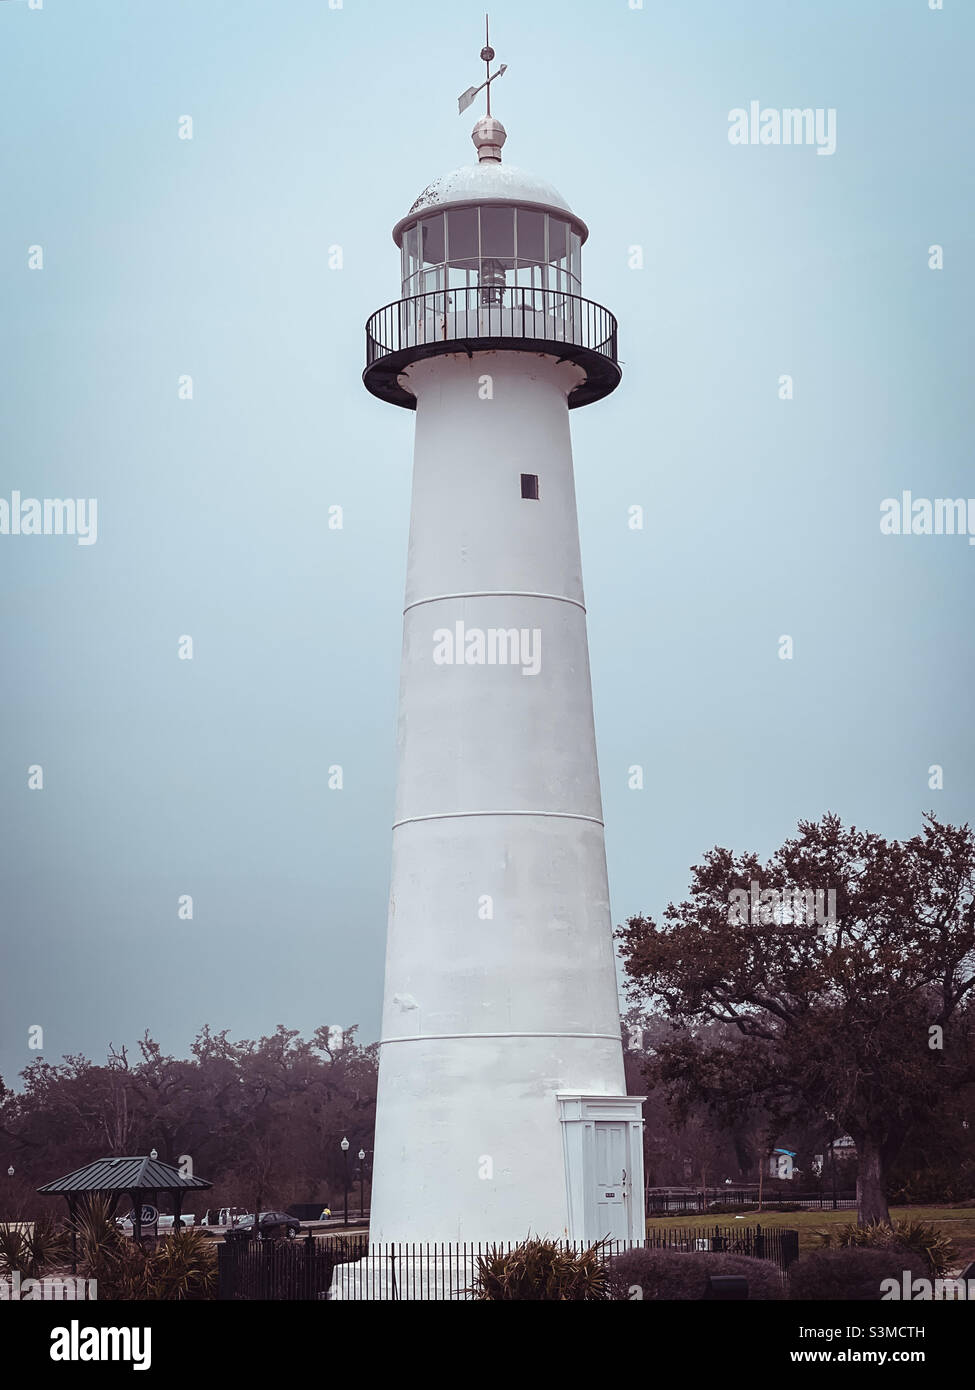 Biloxi Lighthouse on the shores of the Gulf of Mexico in Biloxi, Mississippi. Stock Photo